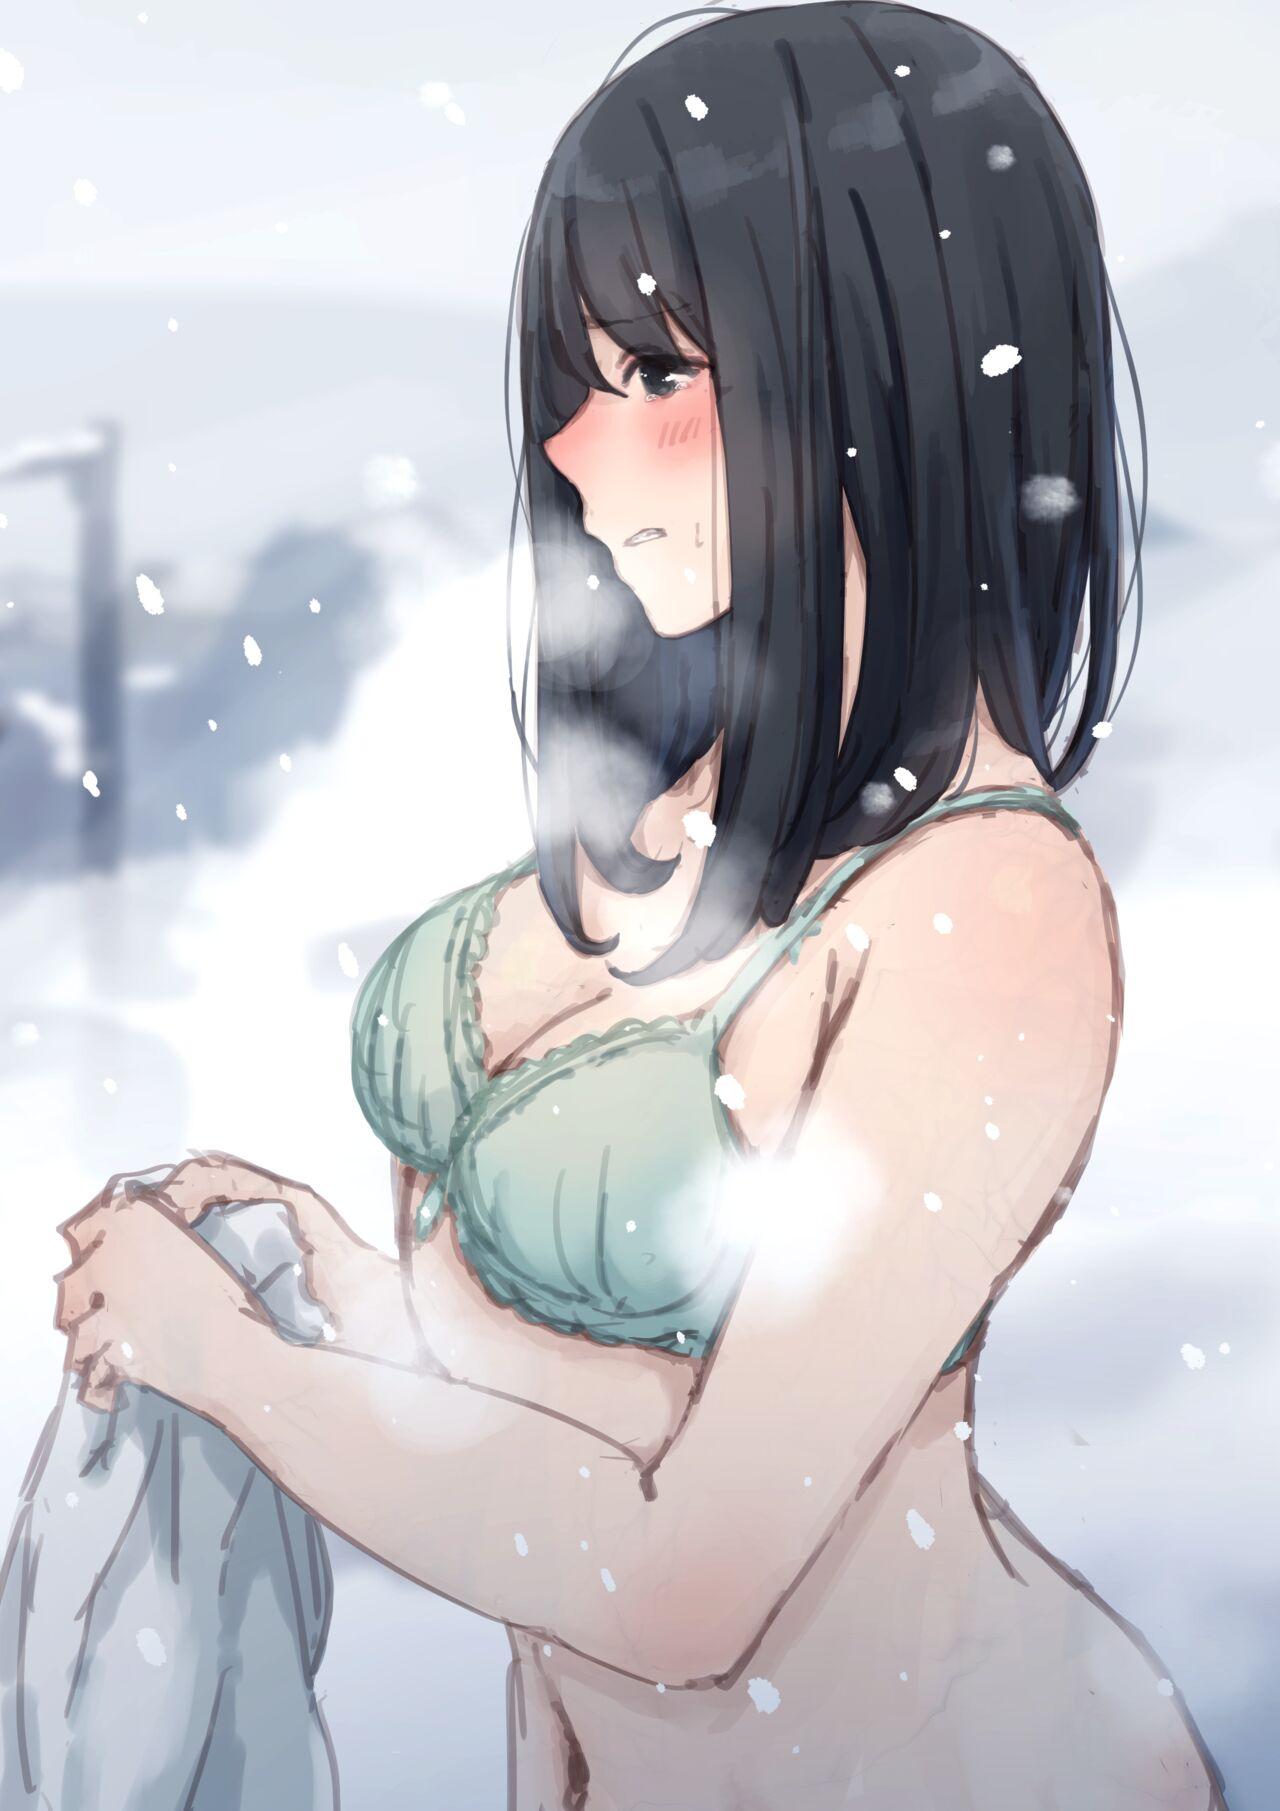 [Yukimuramaru] Public property Sex Slave Girl - Ex - Collection in the Snow - [Digital] [Ongoing] 23